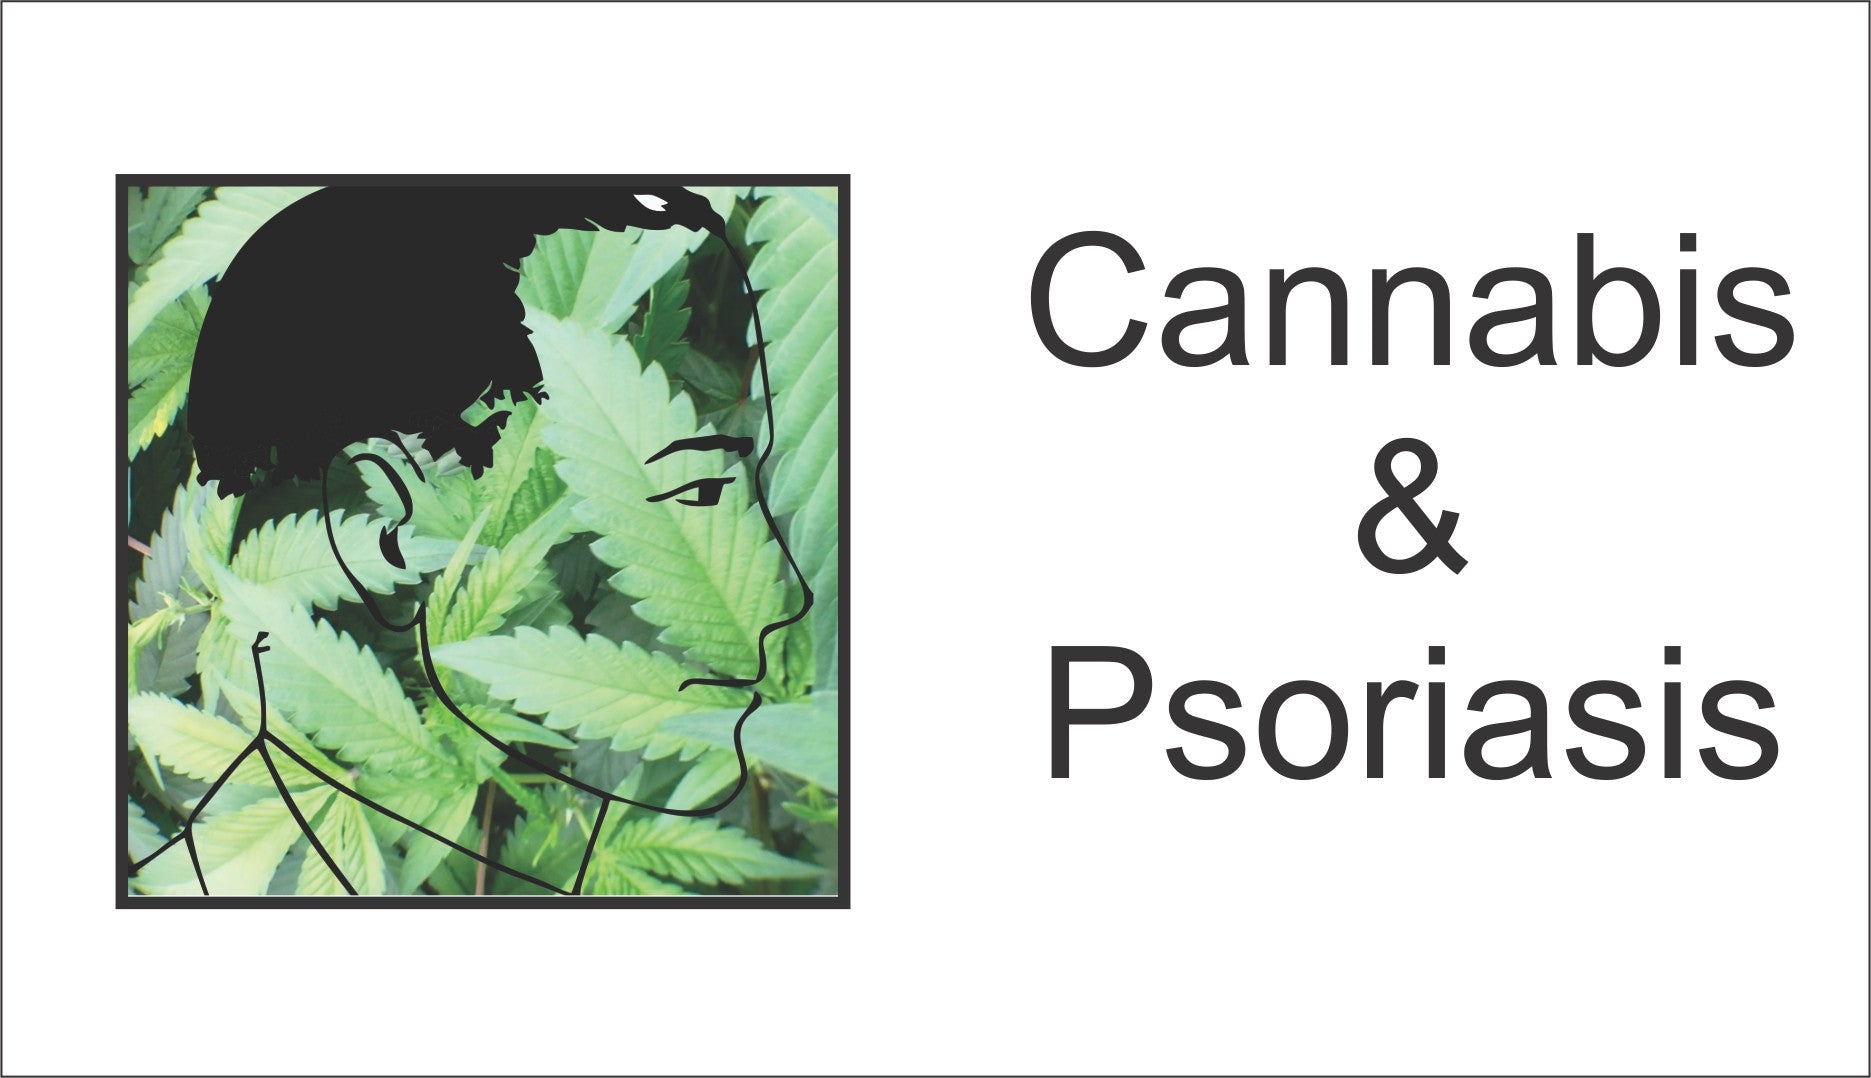 Cannabis and Psoriasis